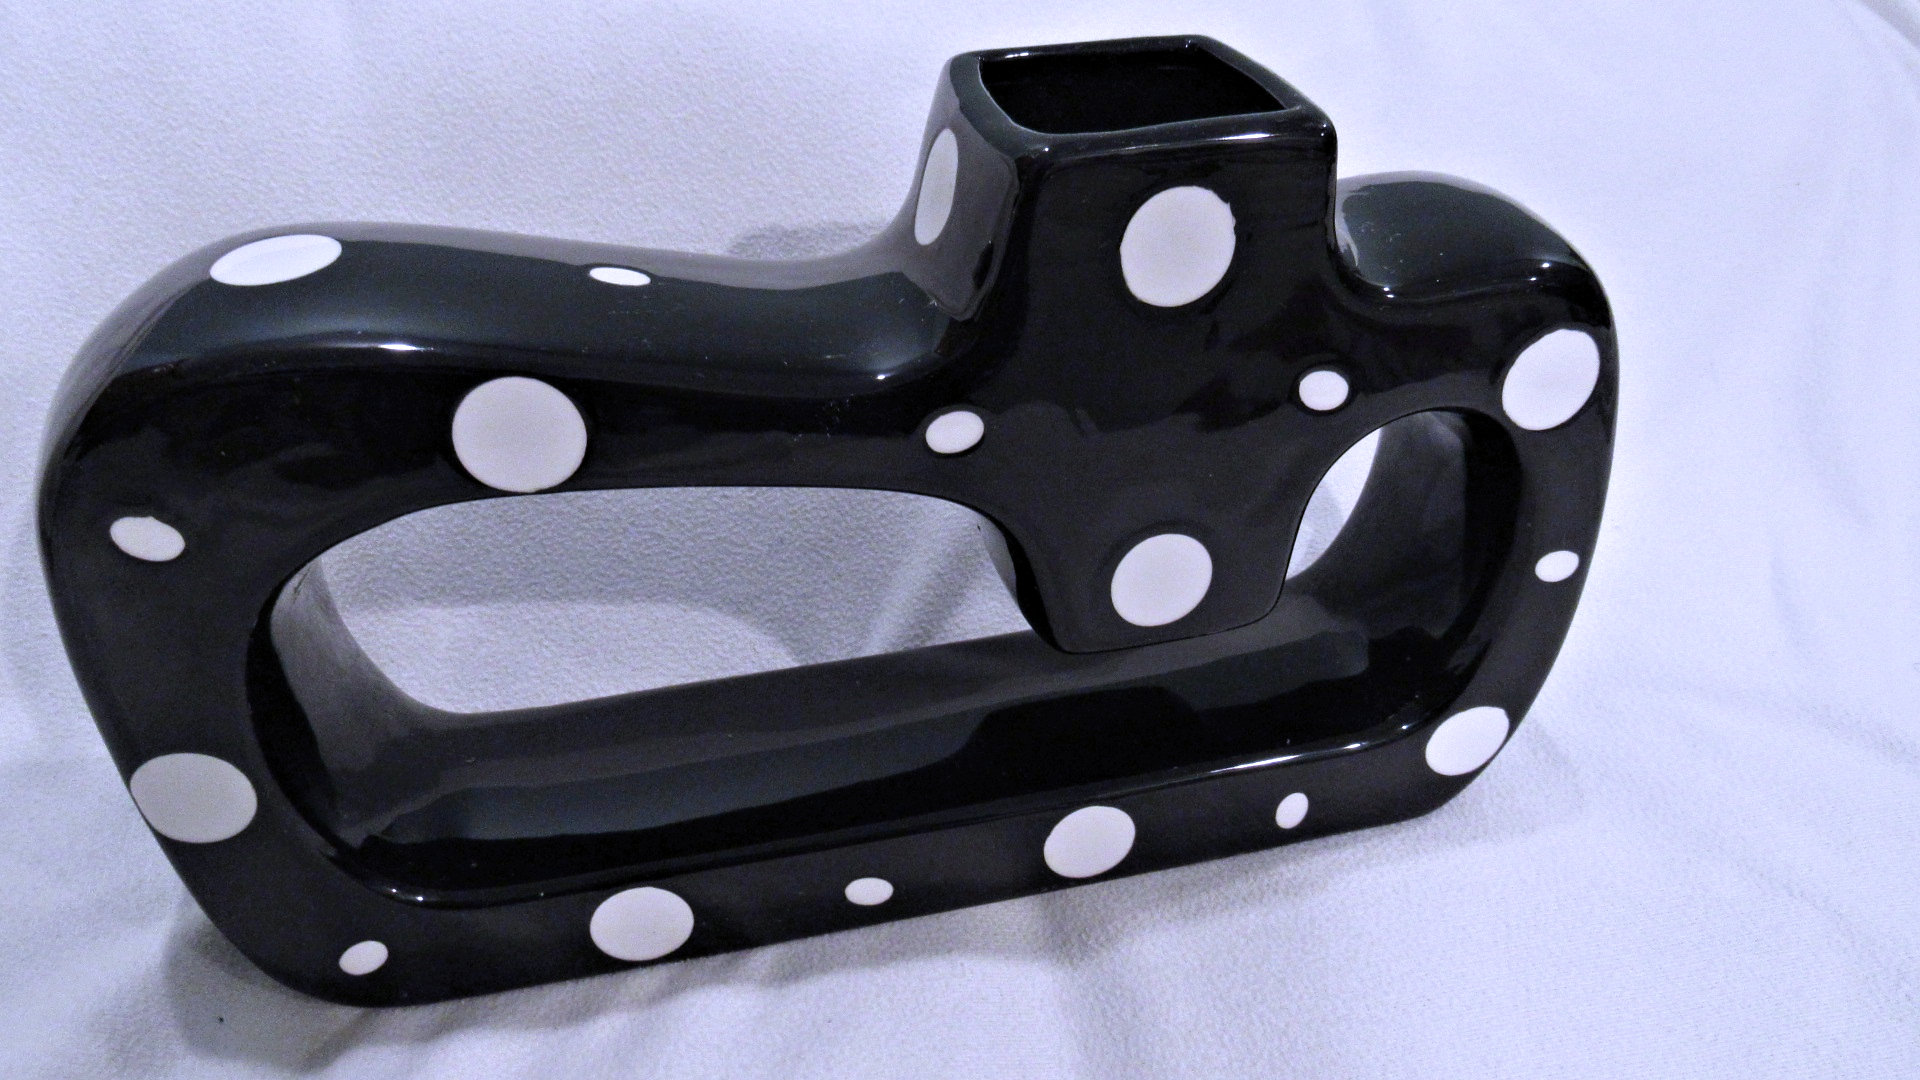 Black Ceramic Vase with White Polka Dots and Smooth Surface.